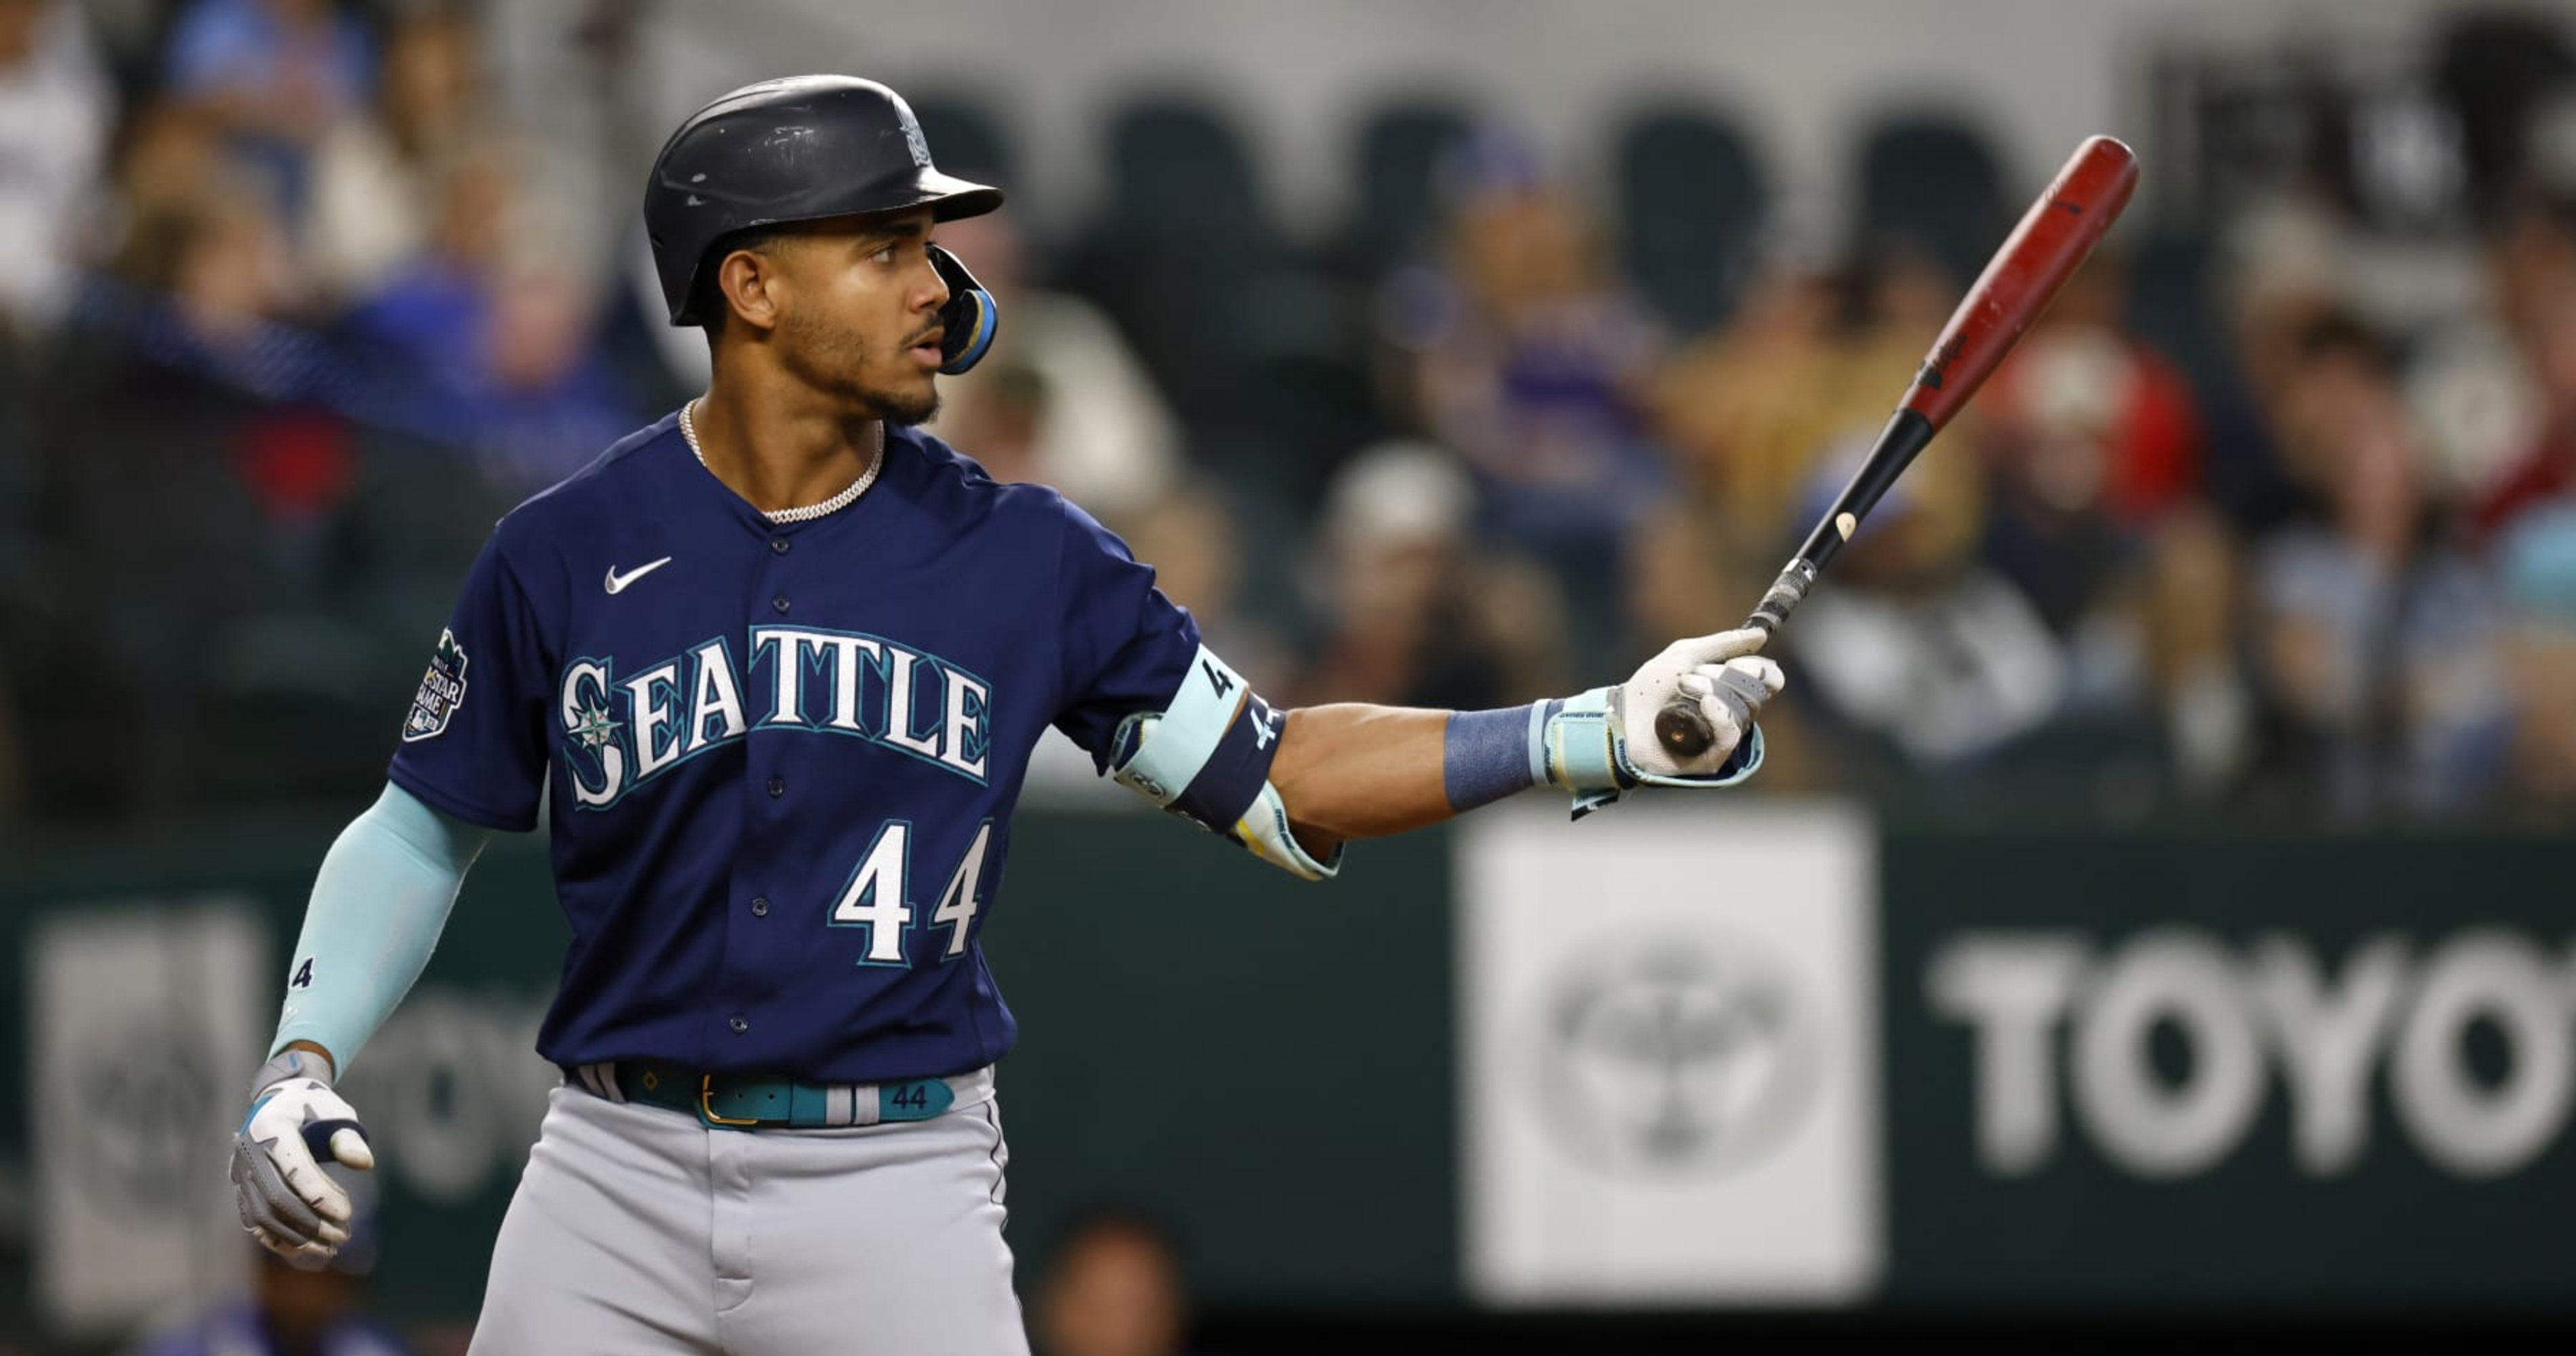 Seattle Mariners: Hottest and Coldest Players Heading into the